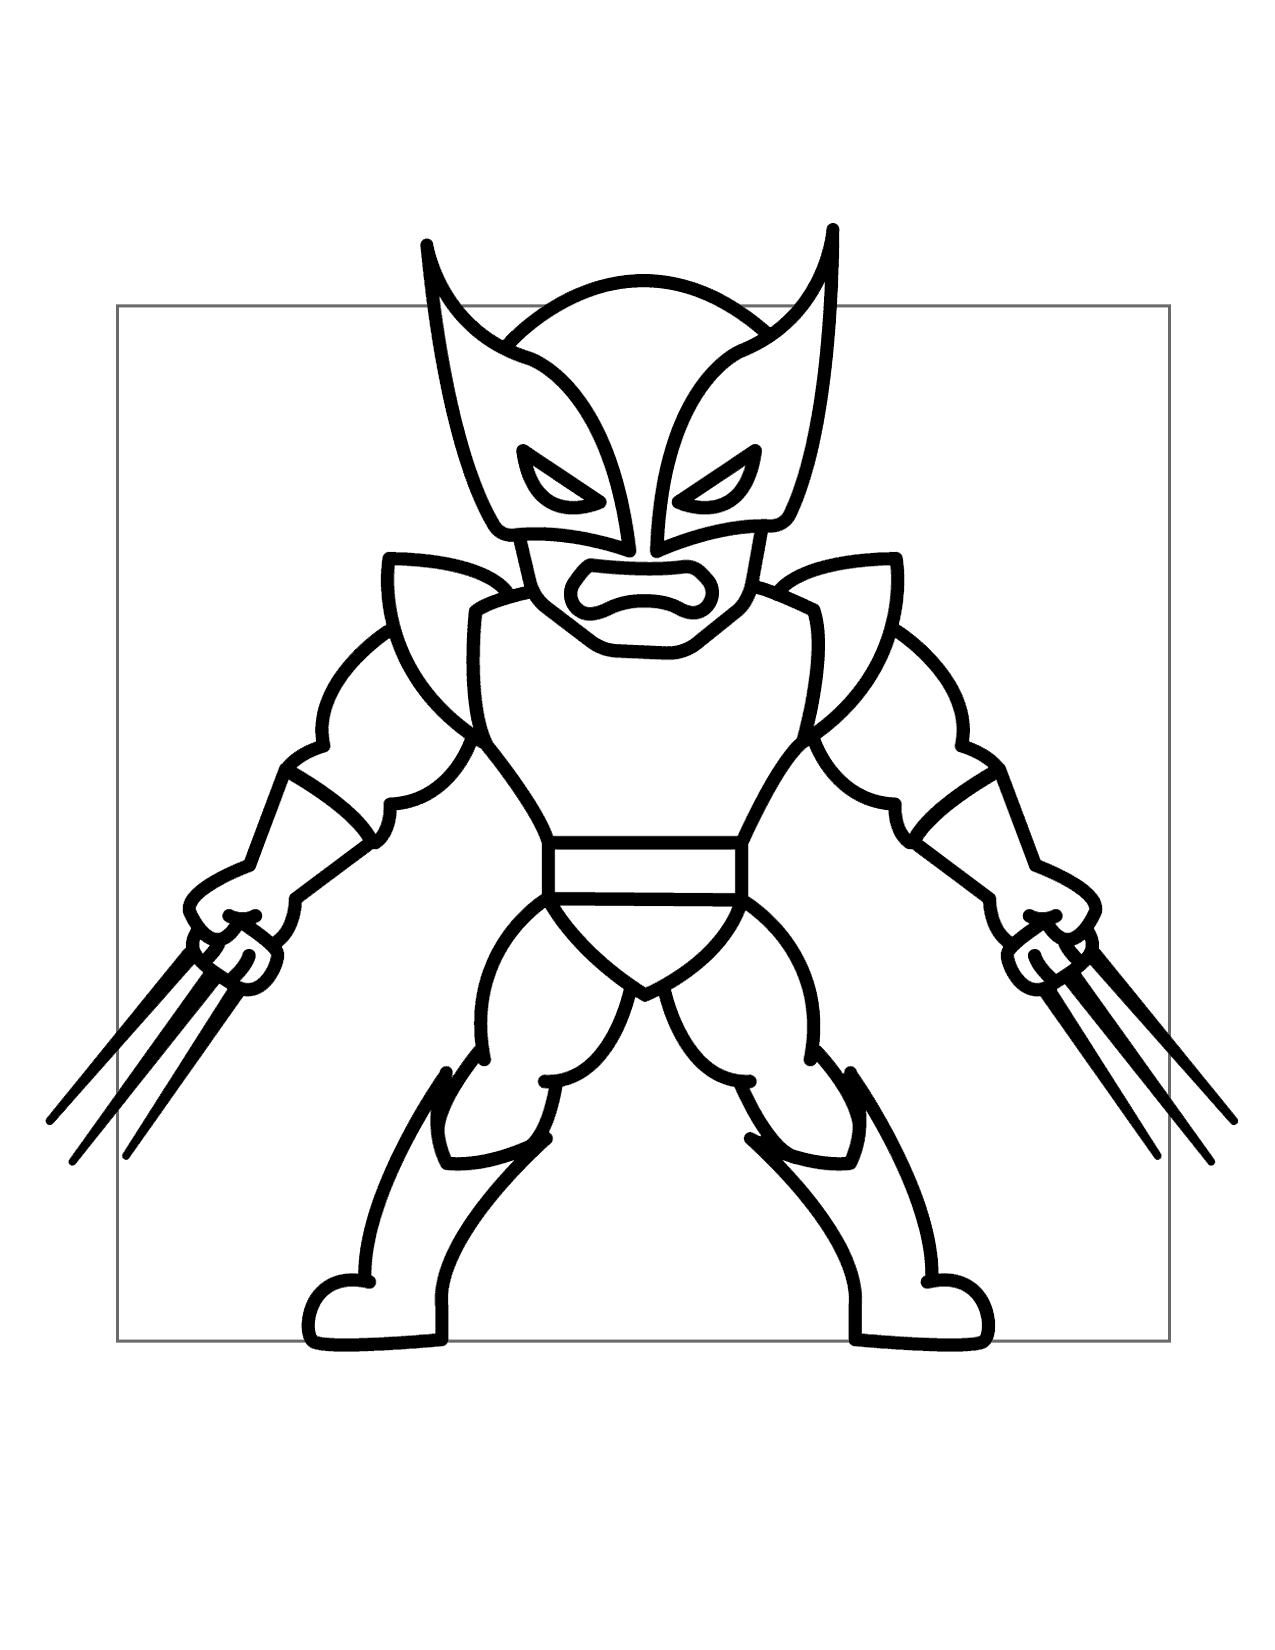 Cute Wolverine Character Coloring Page